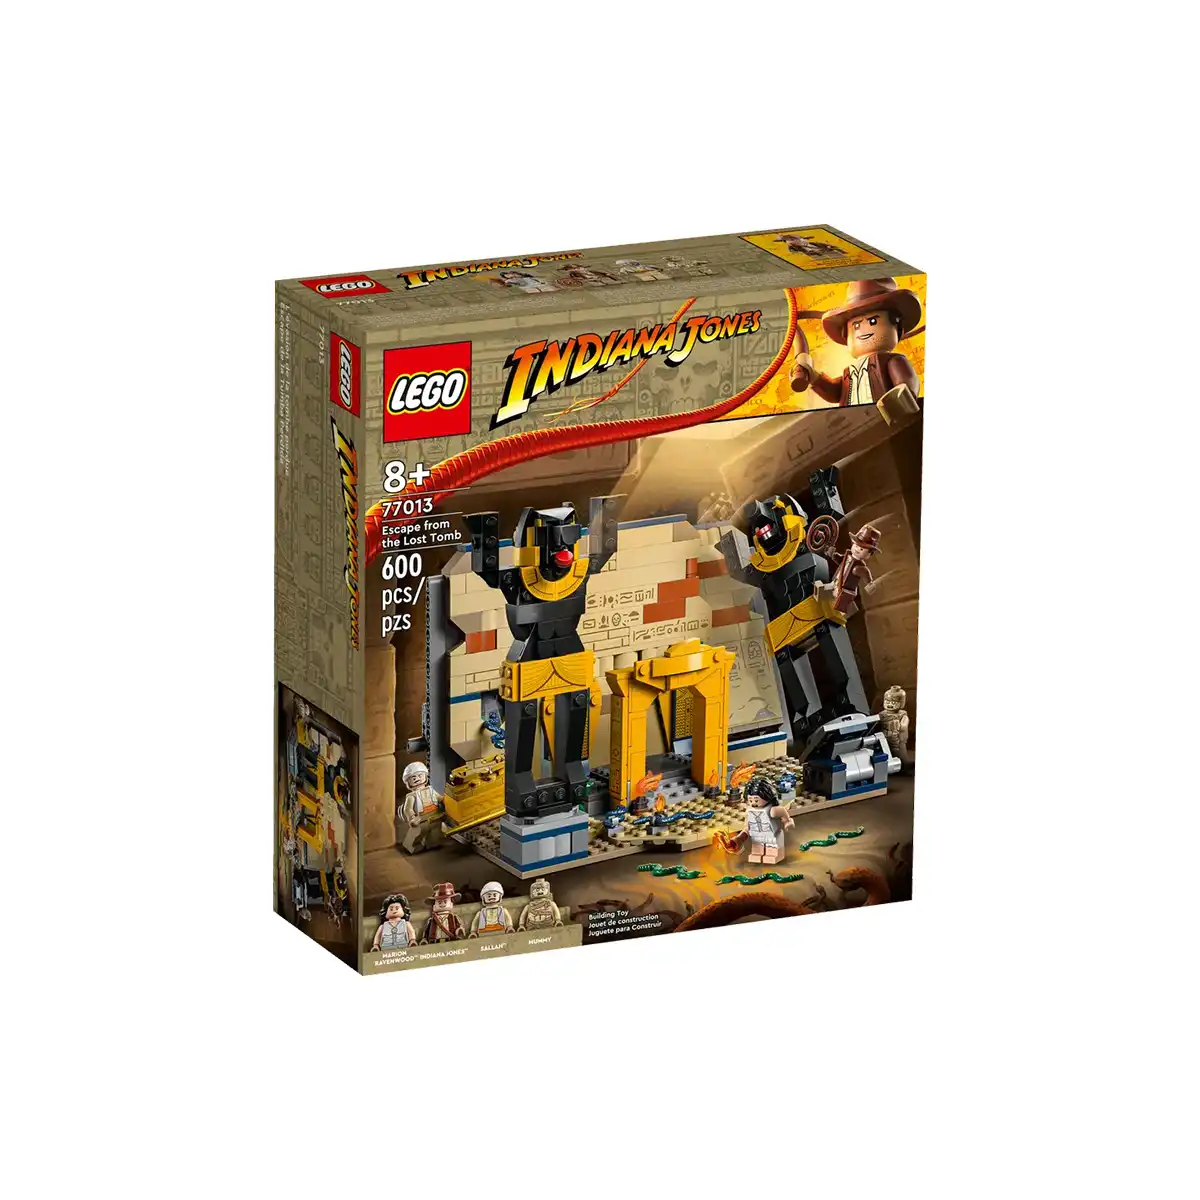 Lego-Indiana Jones™ Escape from the Lost Tomb 600 Pieces -  –  Online shop of Super chain stores